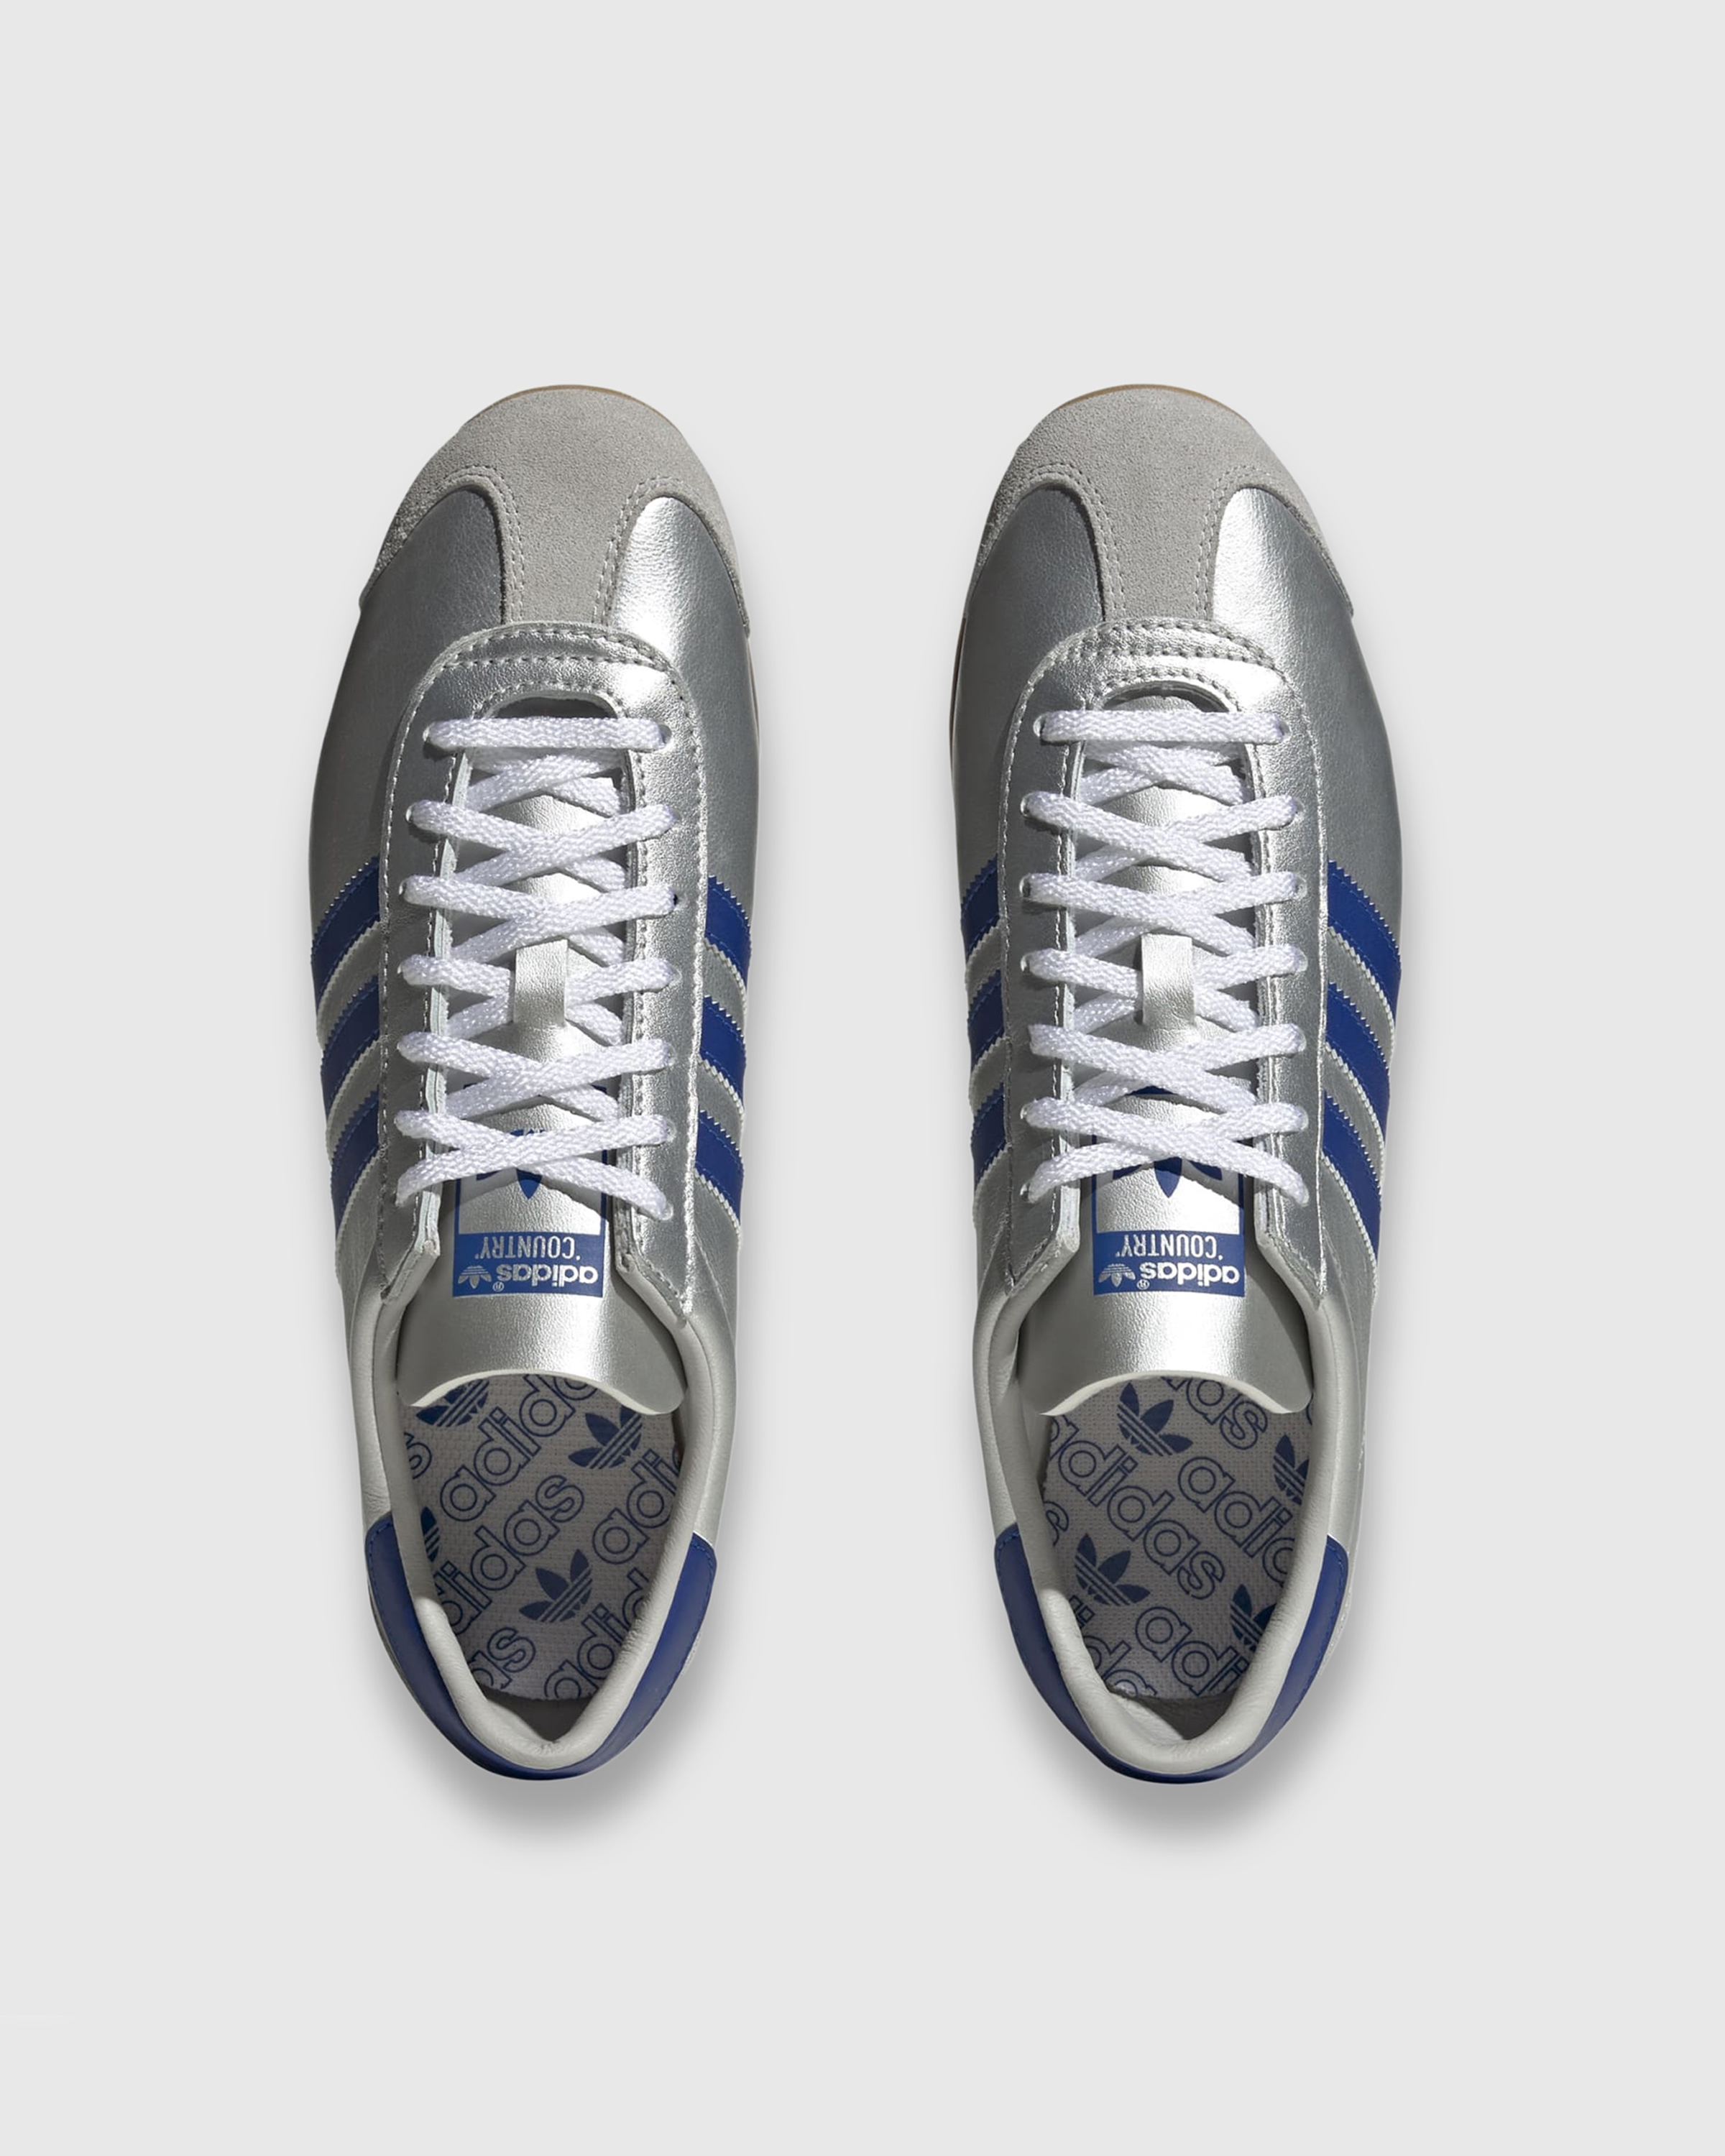 Adidas – Country OG Matte Silver - Sneakers - Silver - Image 3